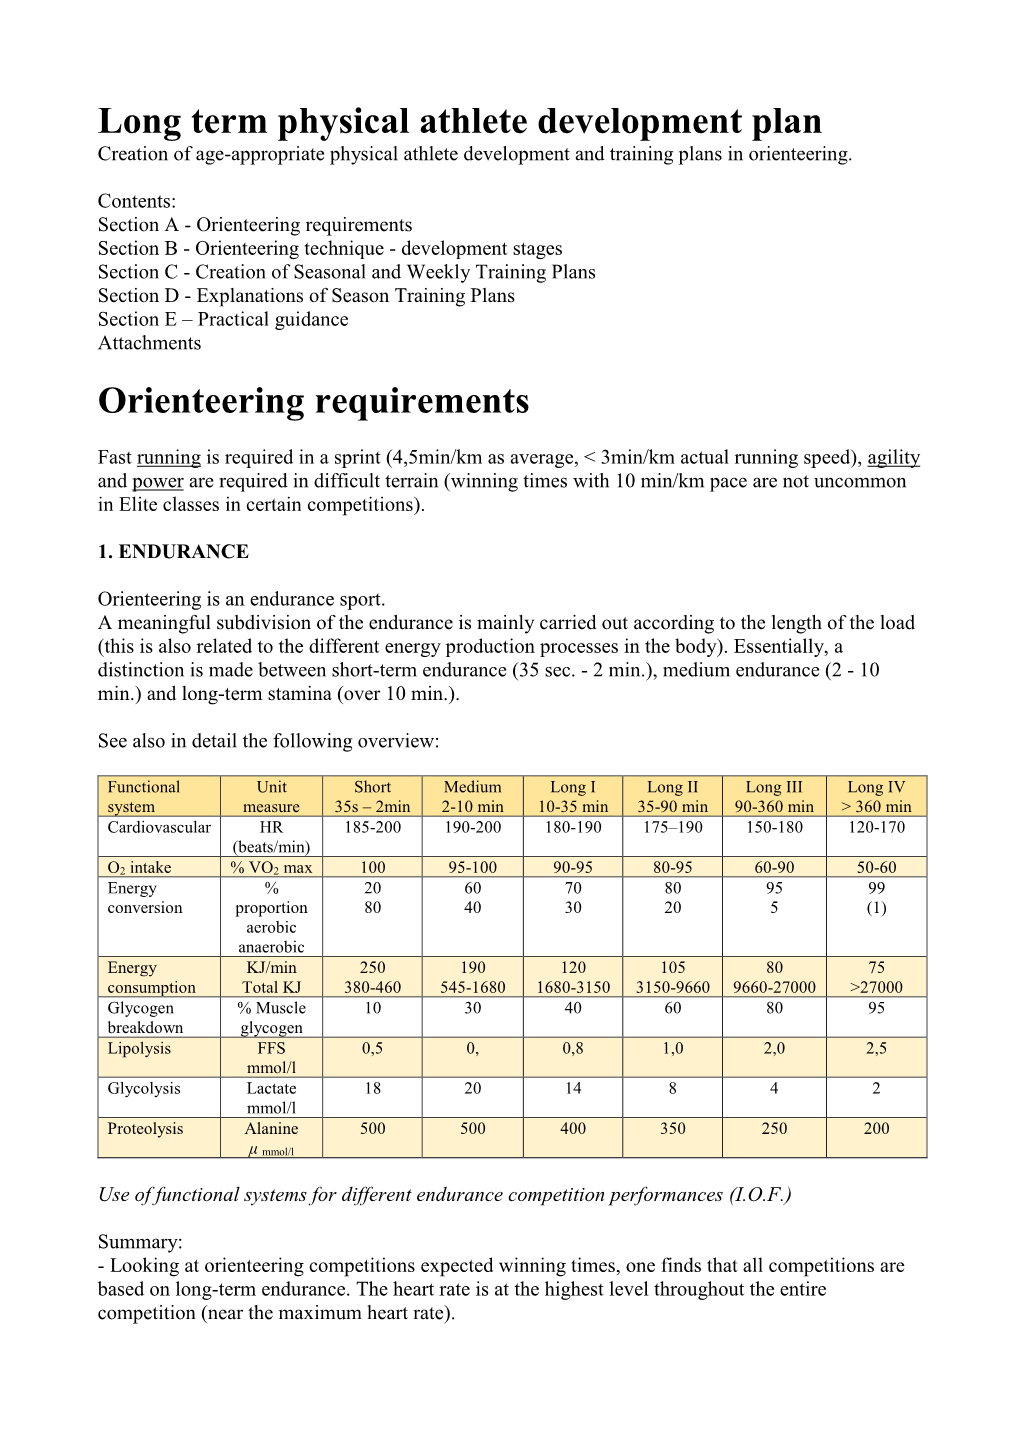 Long Term Physical Athlete Development Plan Orienteering Requirements